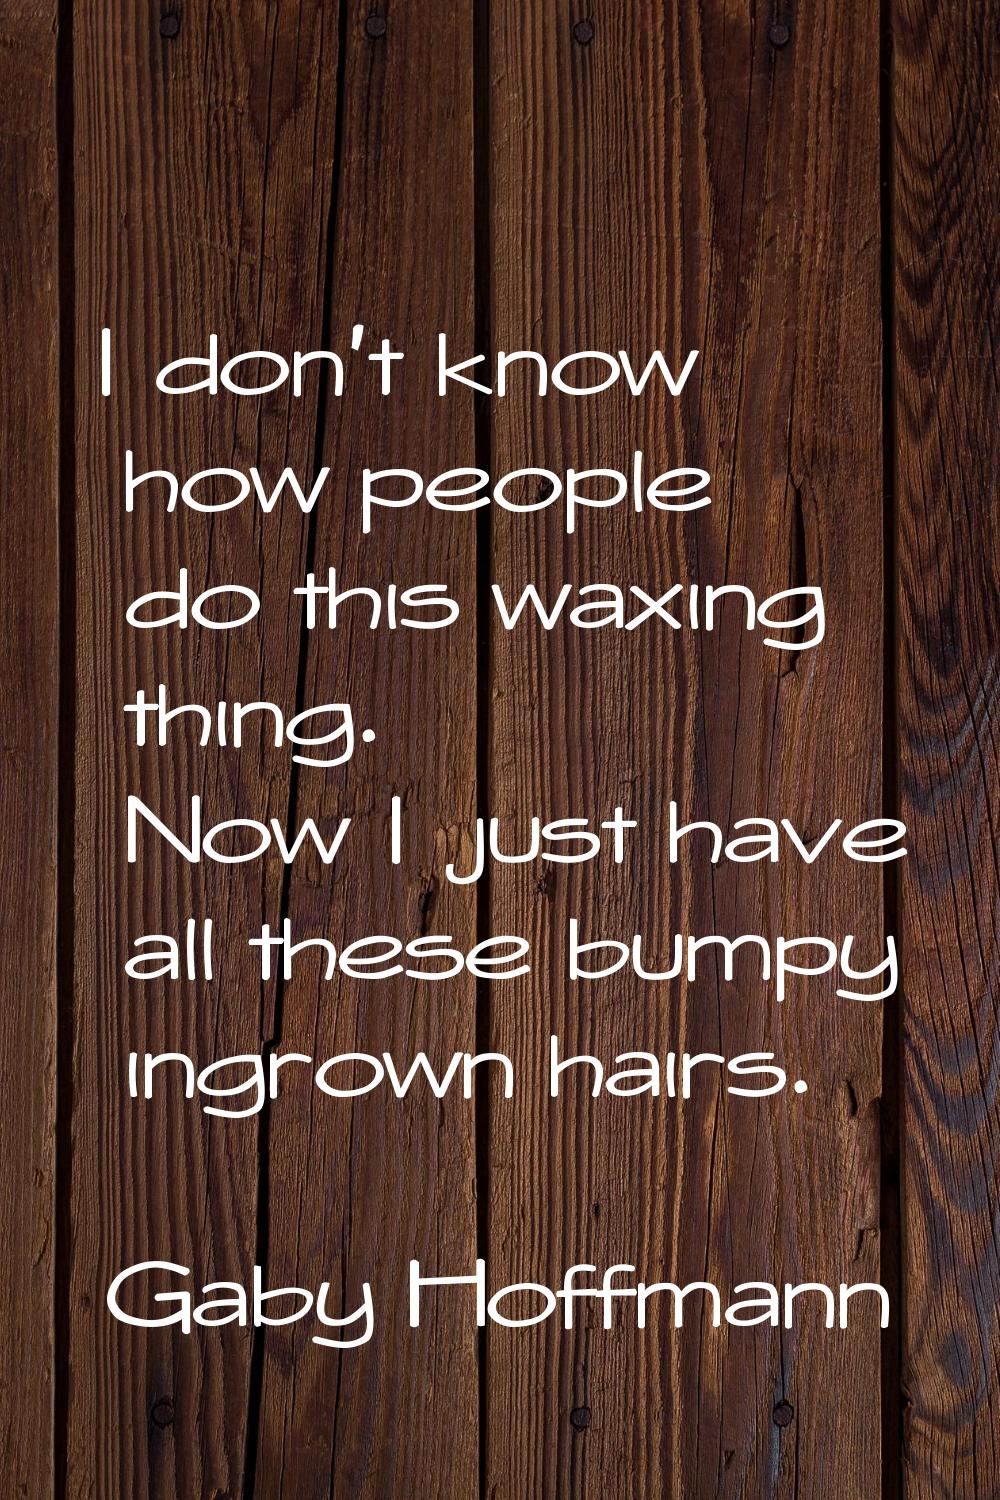 I don't know how people do this waxing thing. Now I just have all these bumpy ingrown hairs.